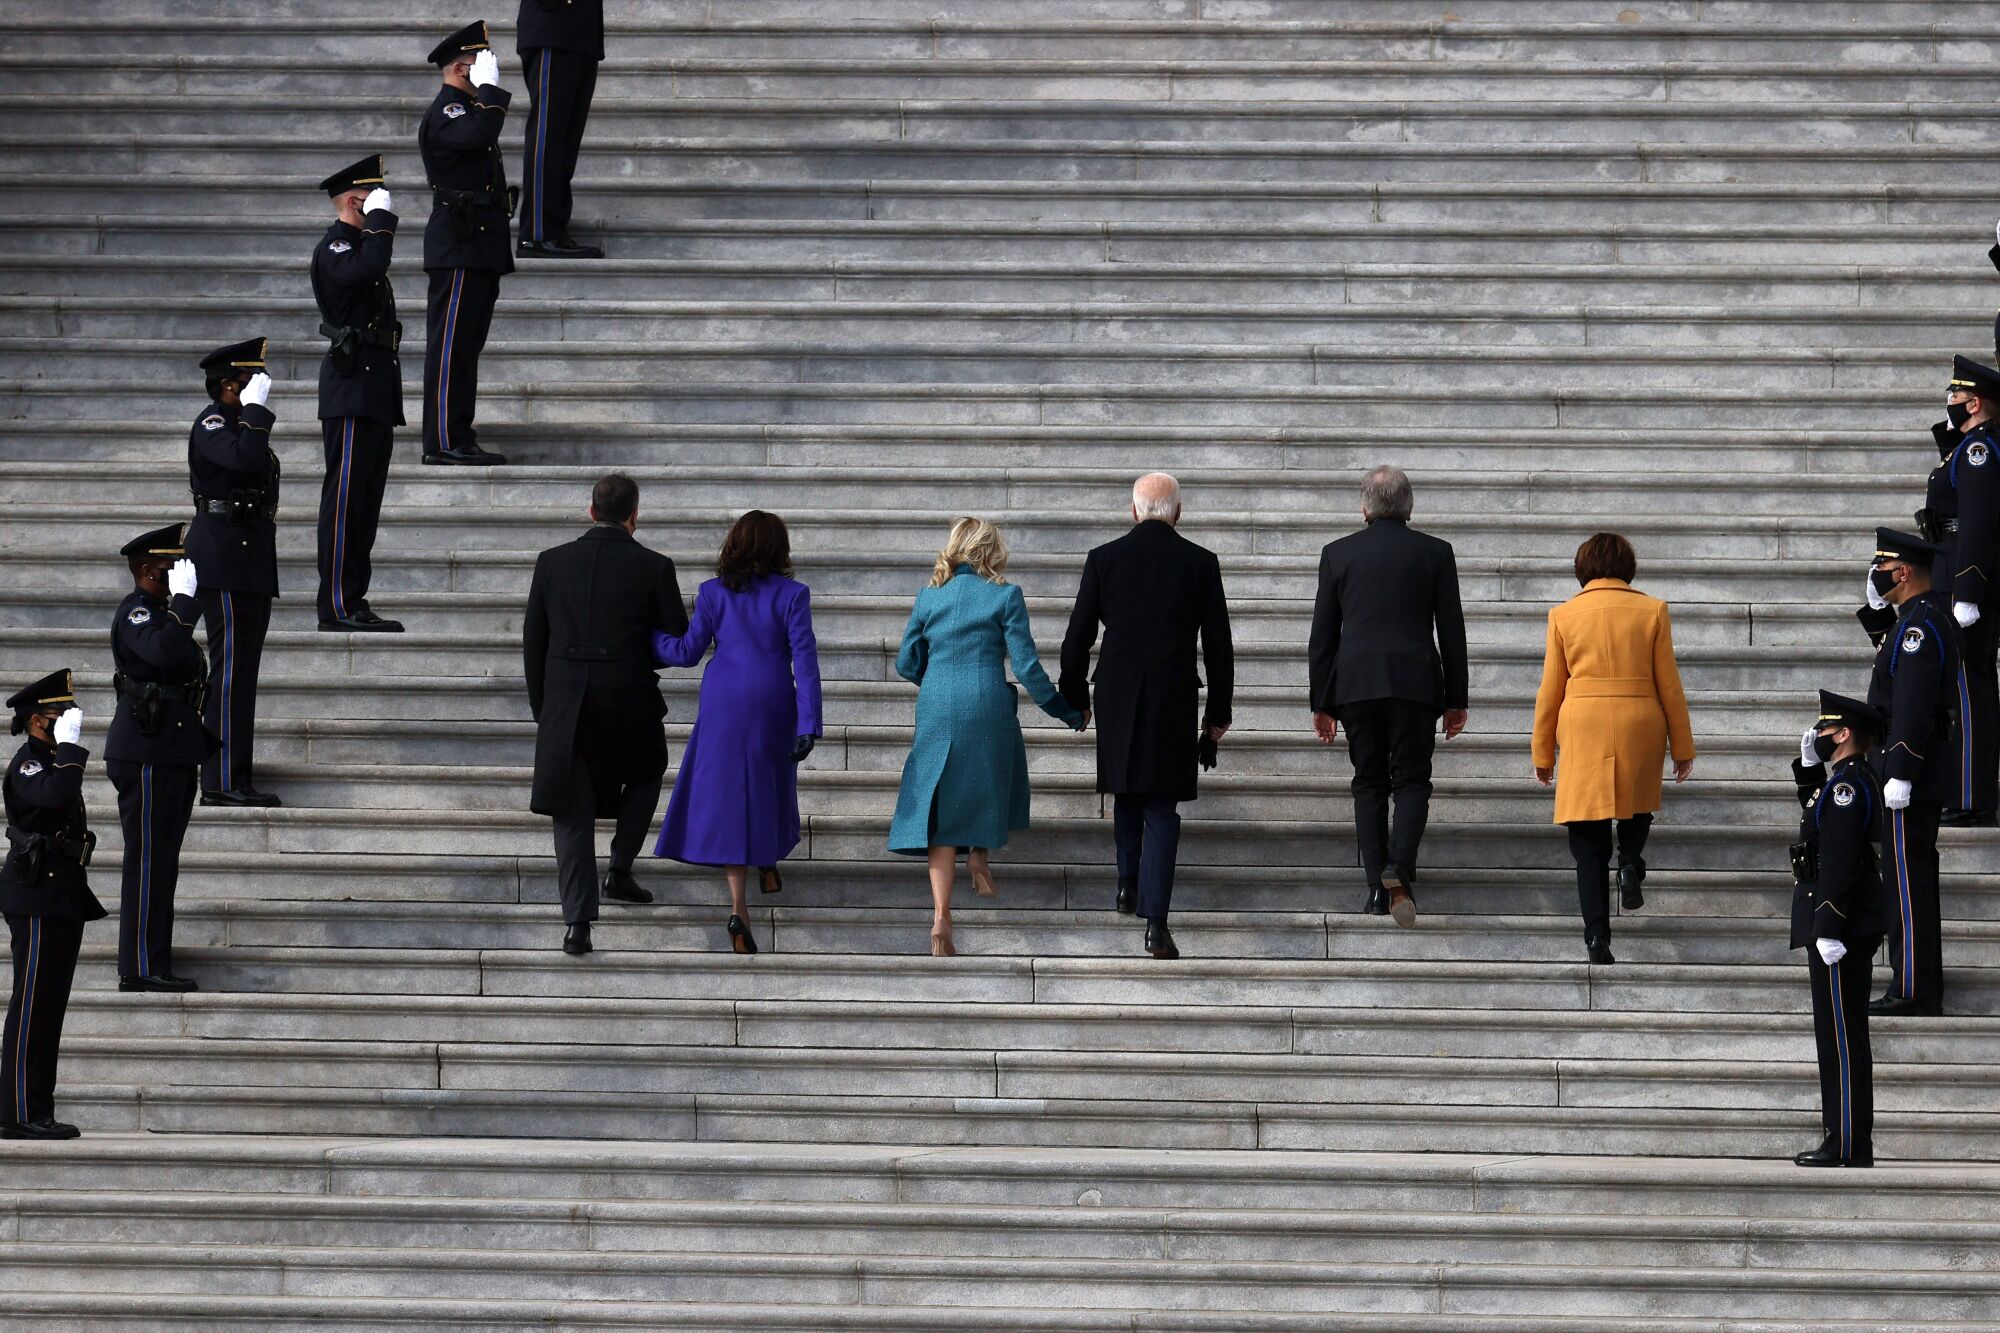 Kamala Harris, Joe Biden and their spouses, joined by two senators, walk into the Capitol for the inauguration.